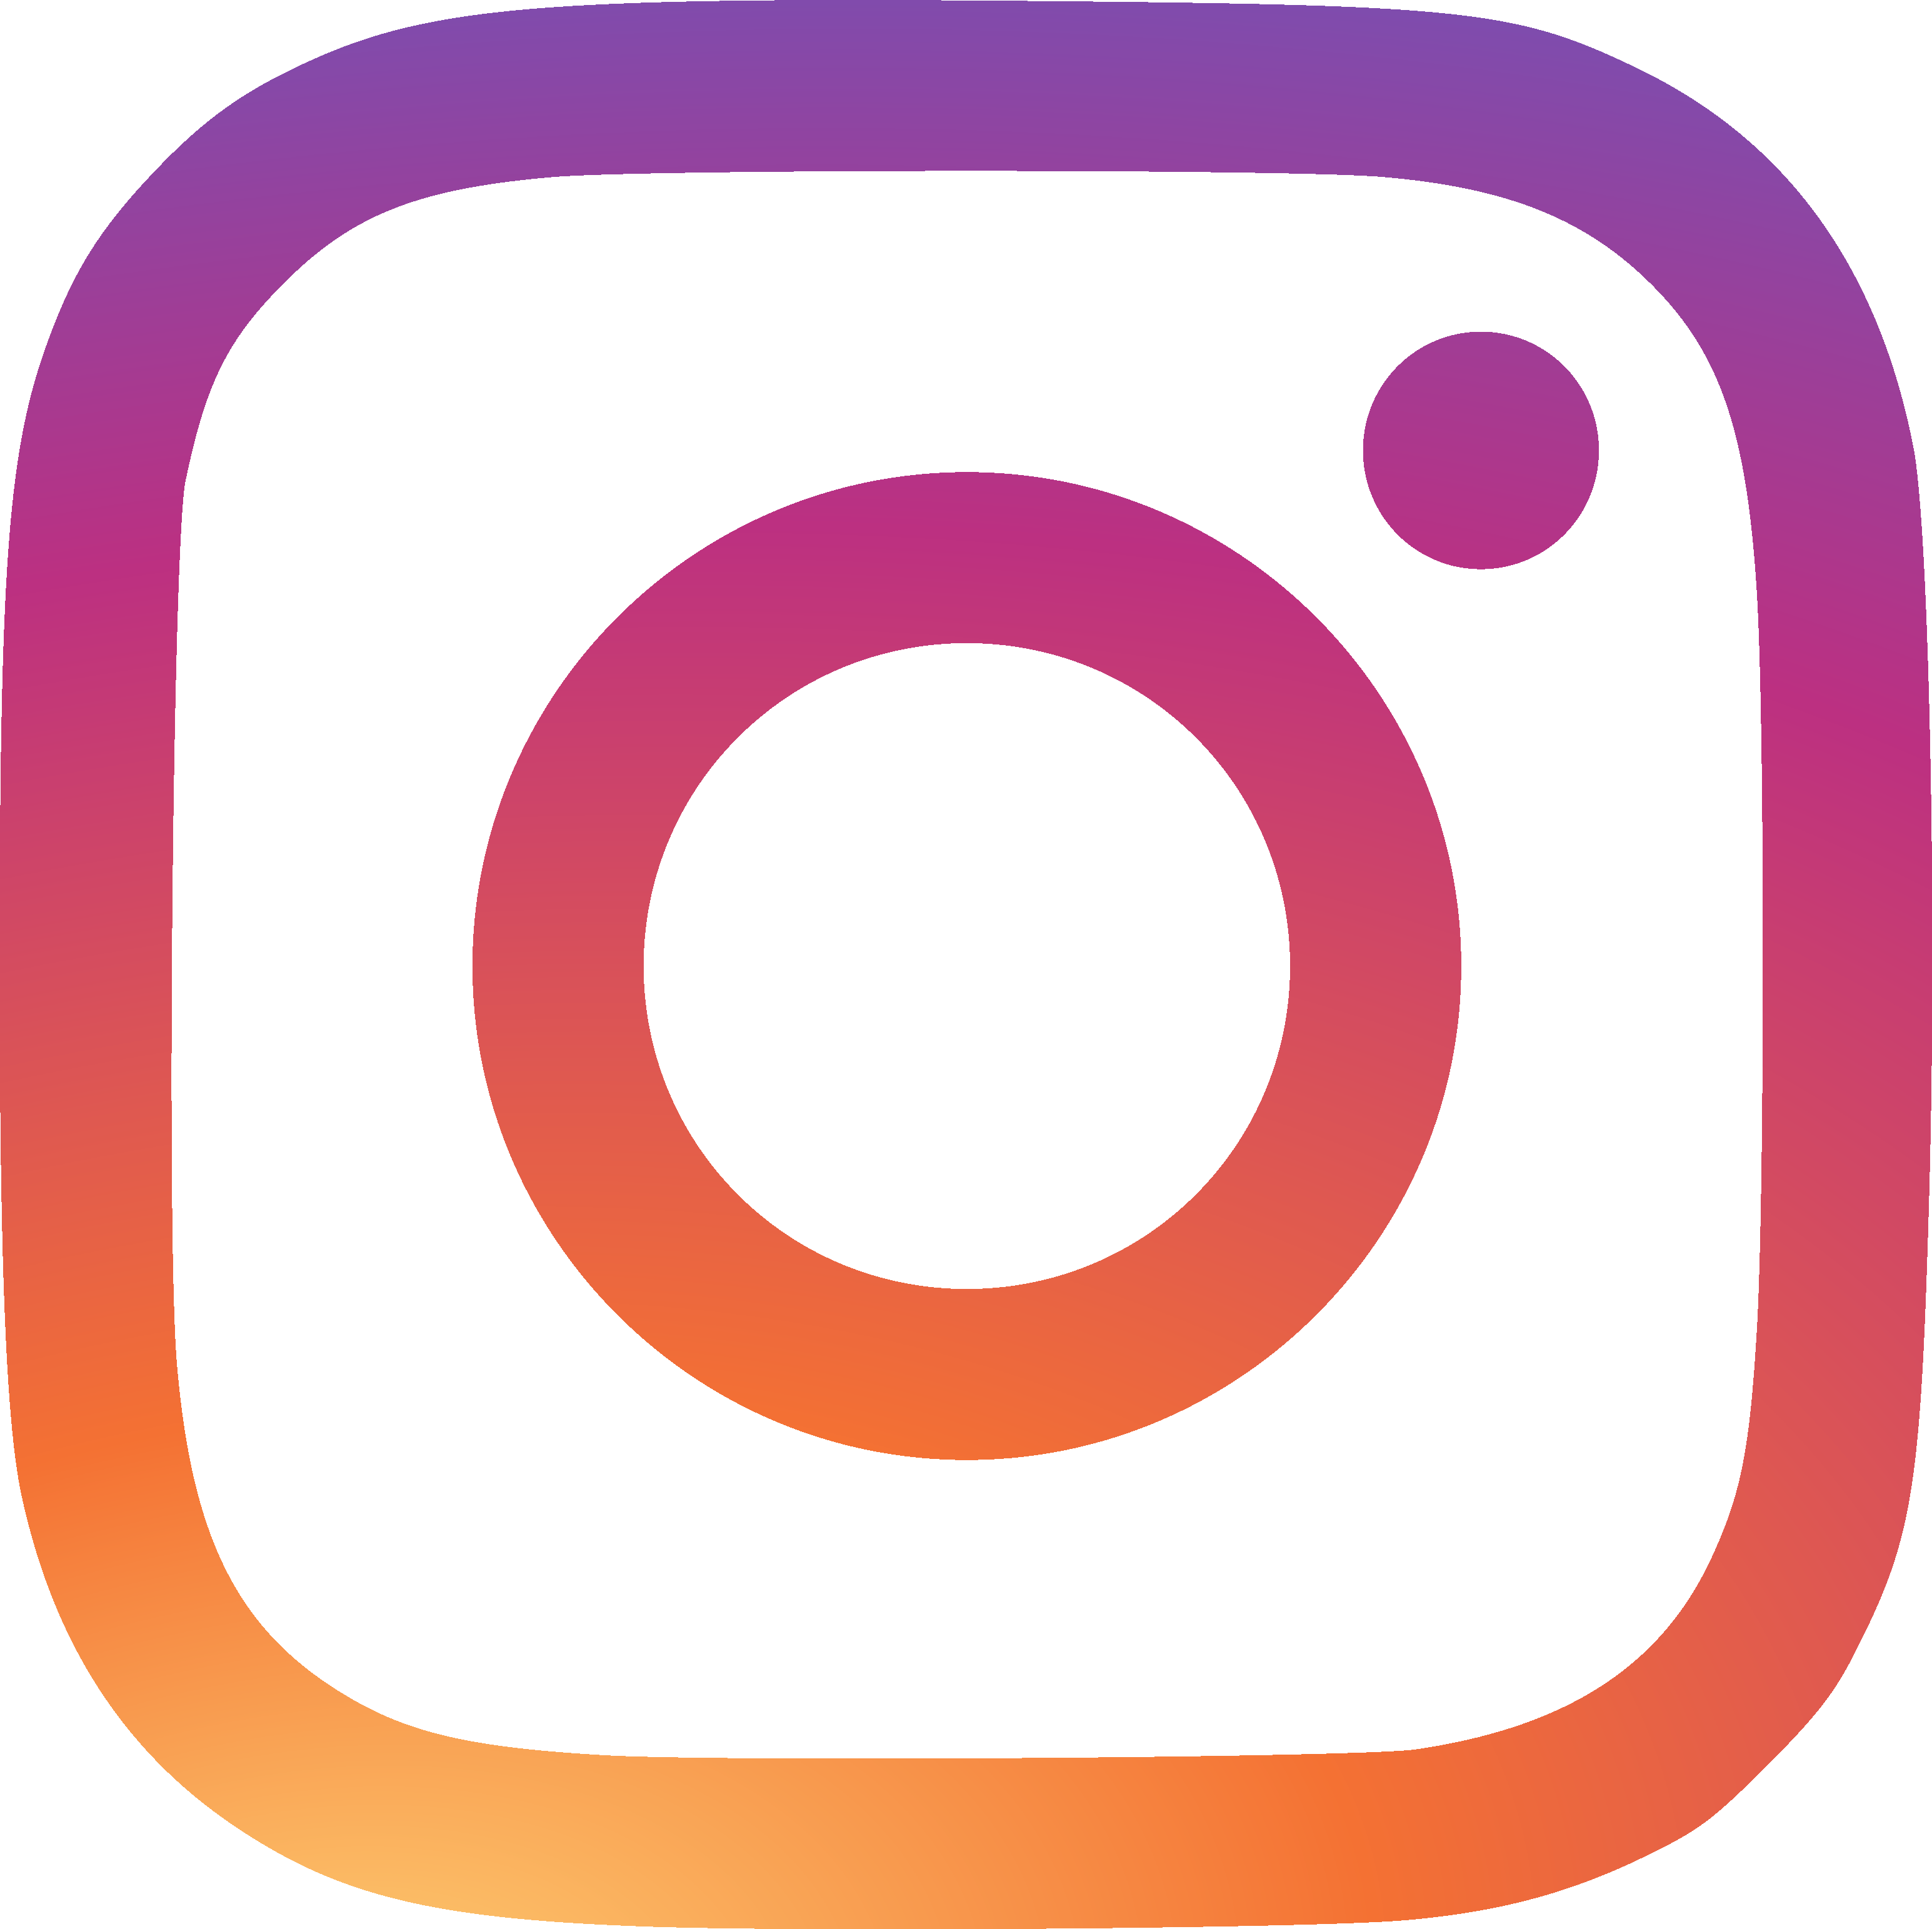 Download Computer Neon Instagram Icons Hd Image Free Png Hq Png Image Freepngimg